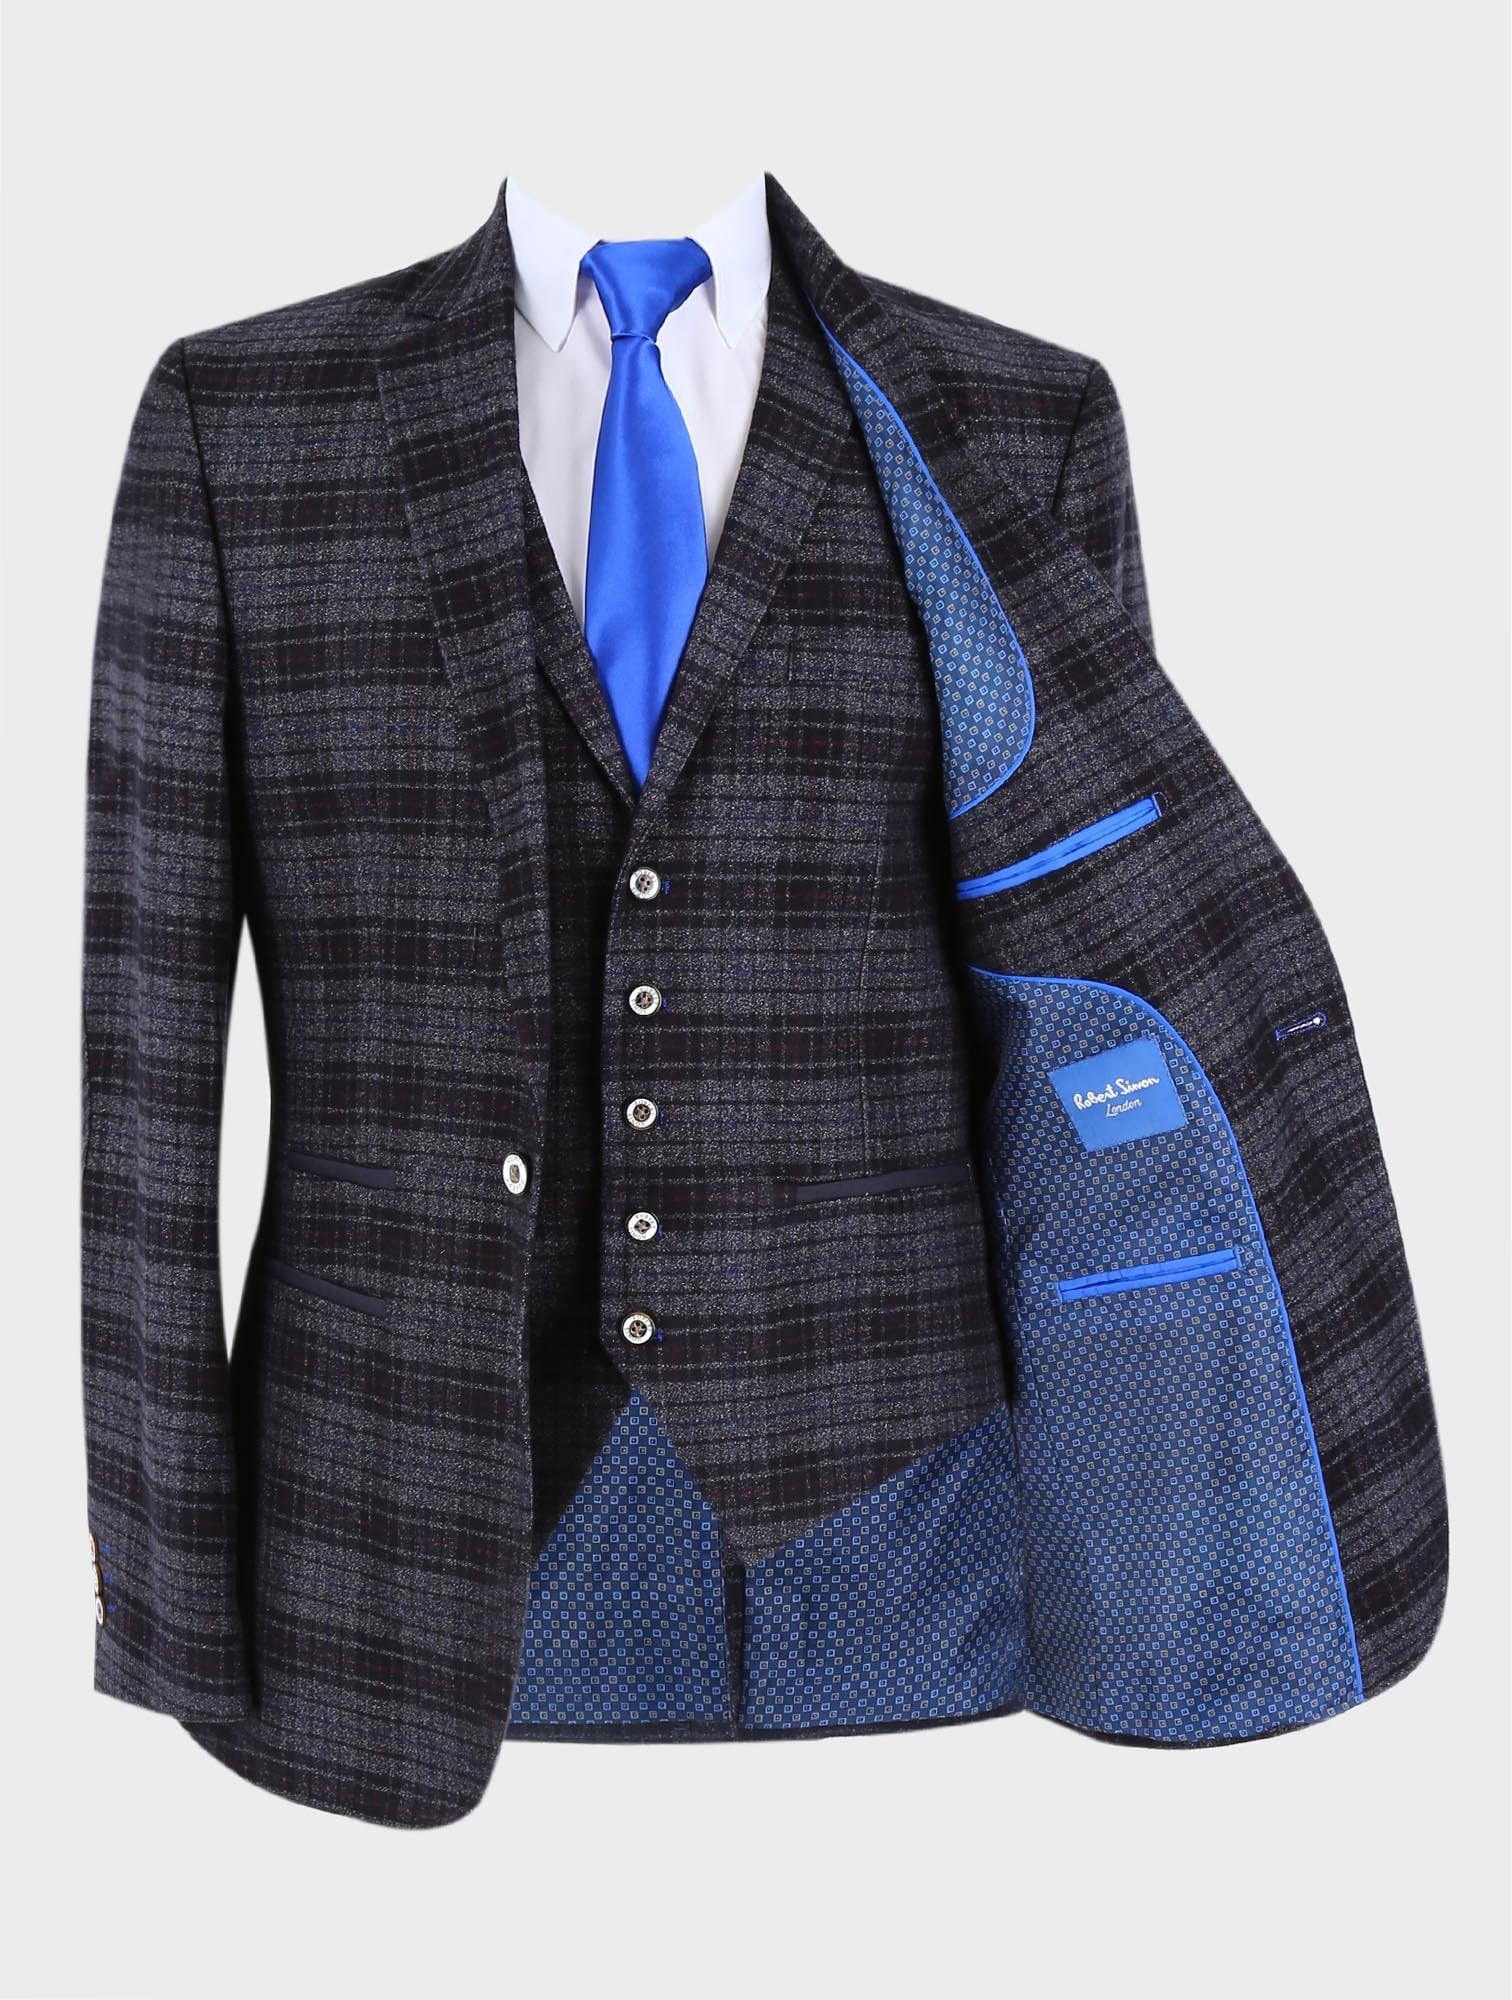 Mens Blue Tweed Check 3 Piece Suit Blazer Trouser Waistcoat Sold as Separately 